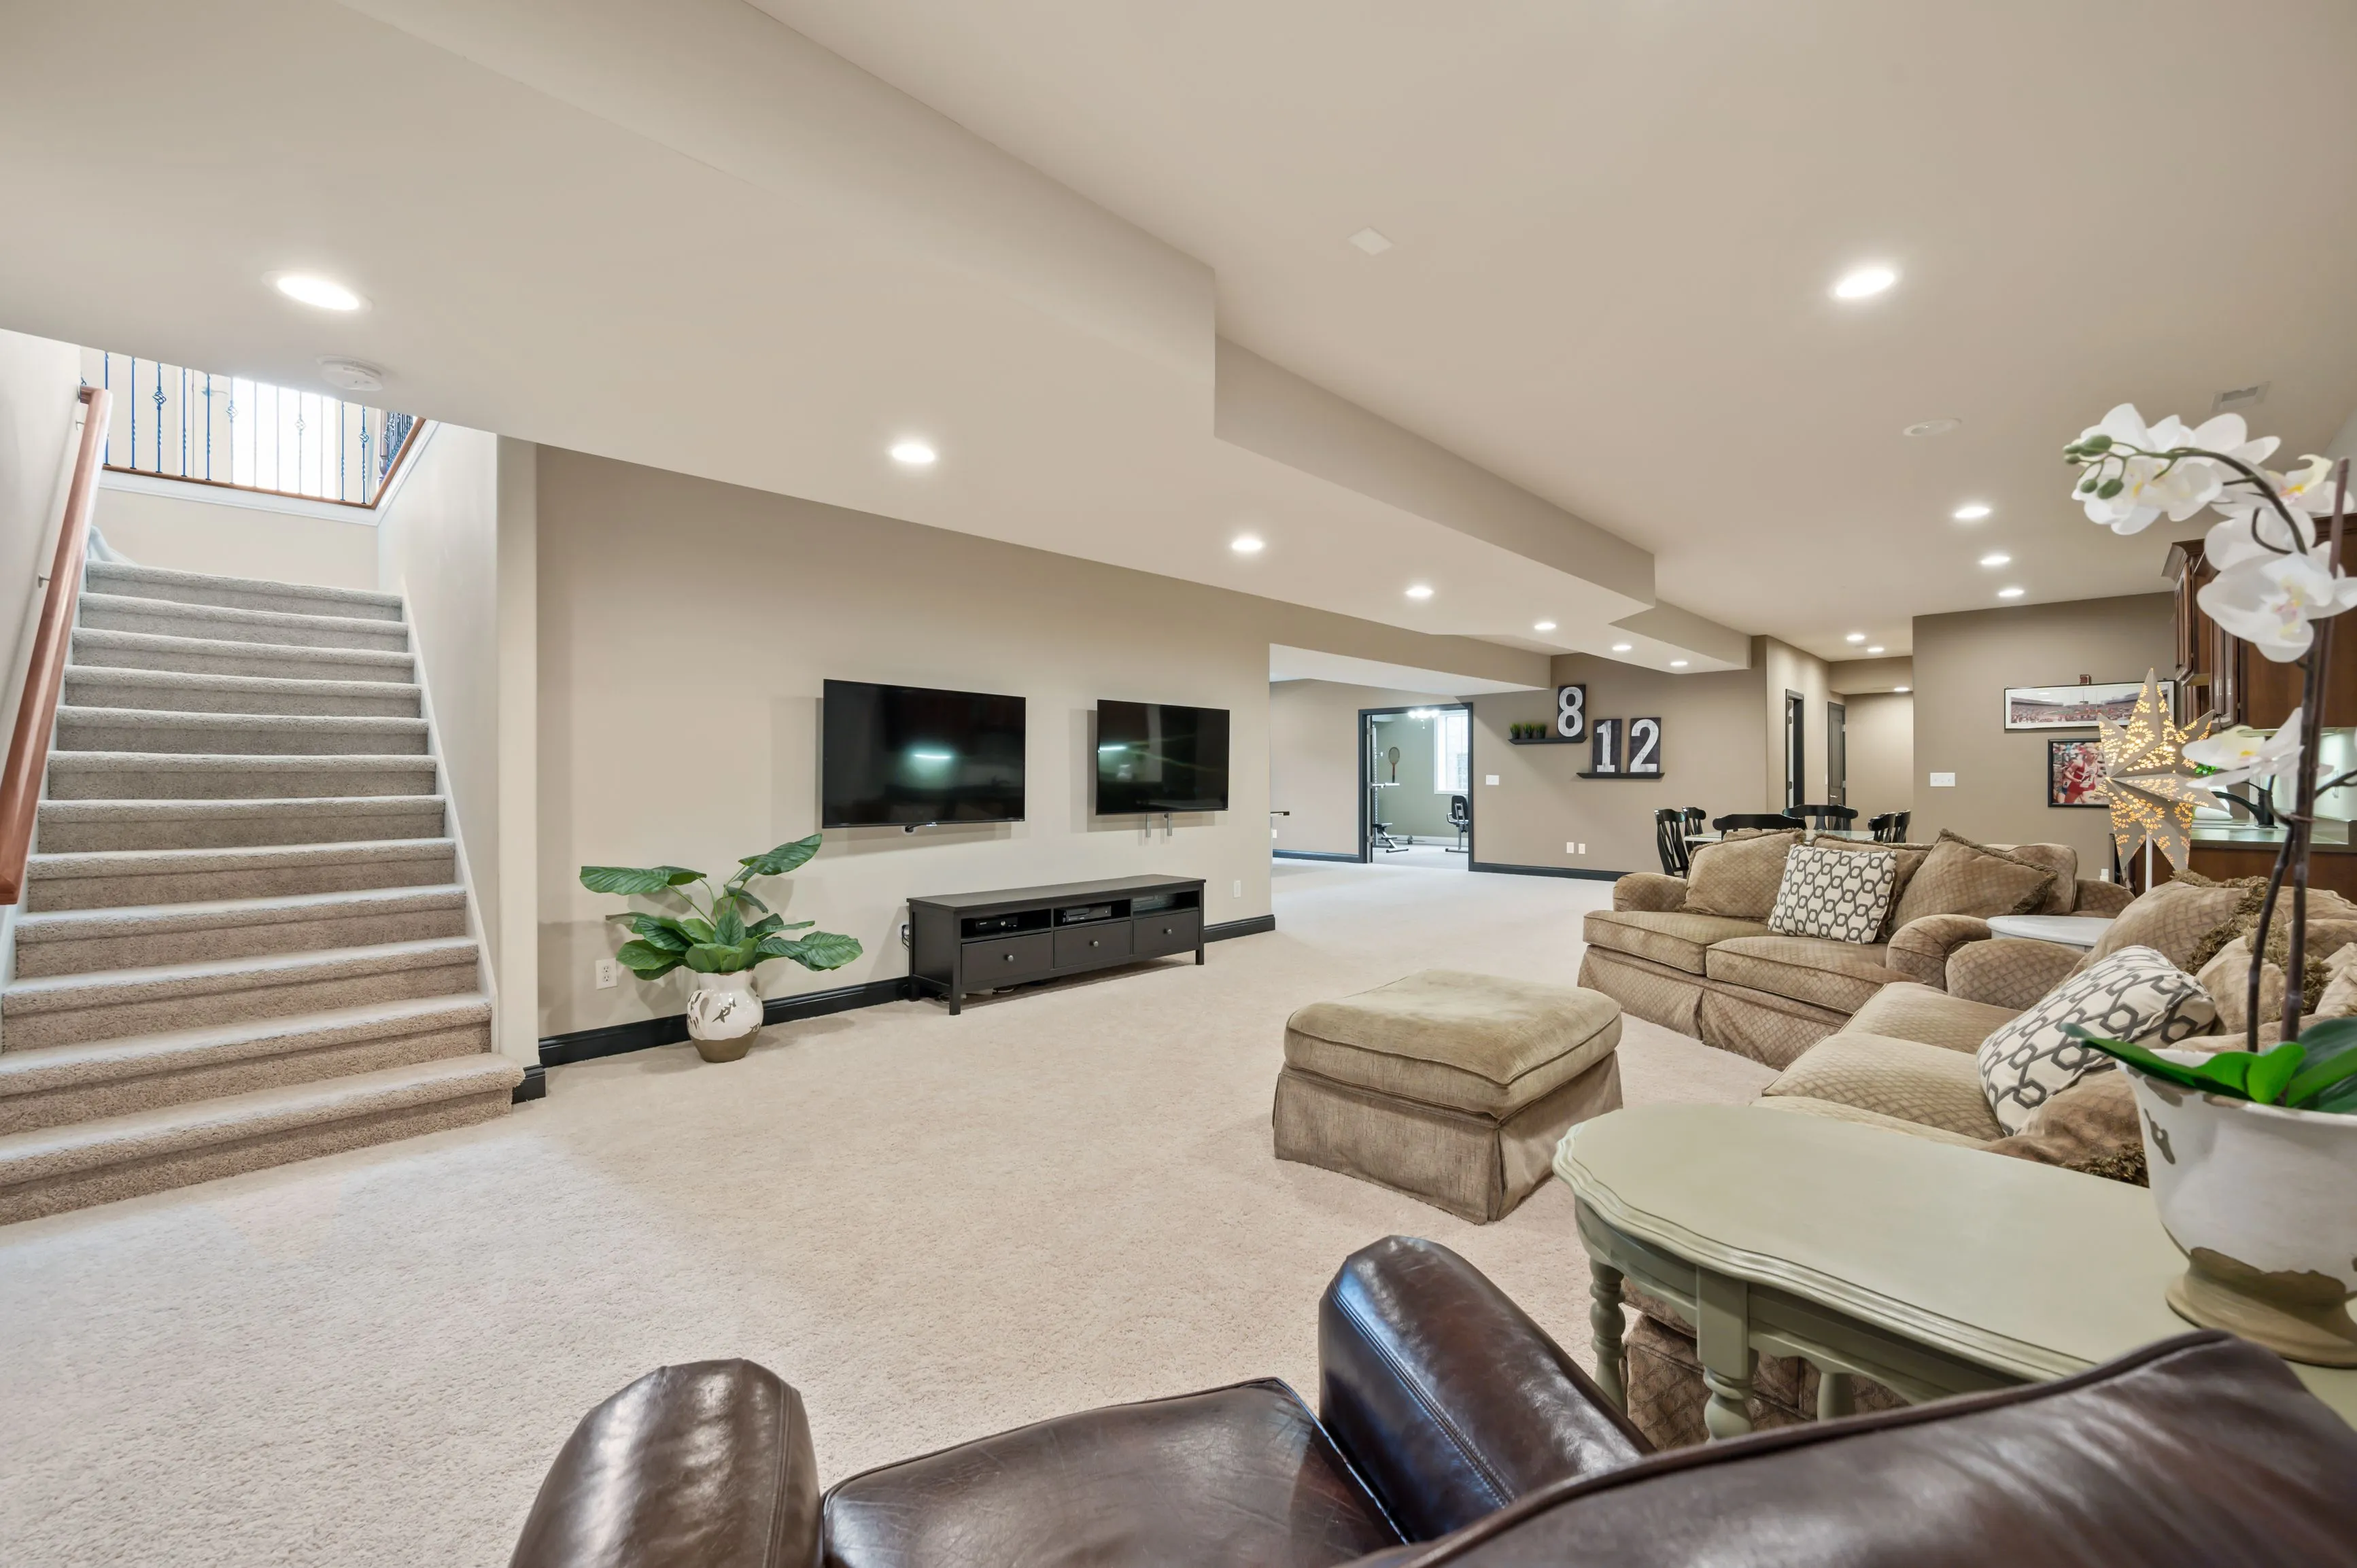 Spacious modern basement living area with sectional sofa, flat-screen TV, and staircase.